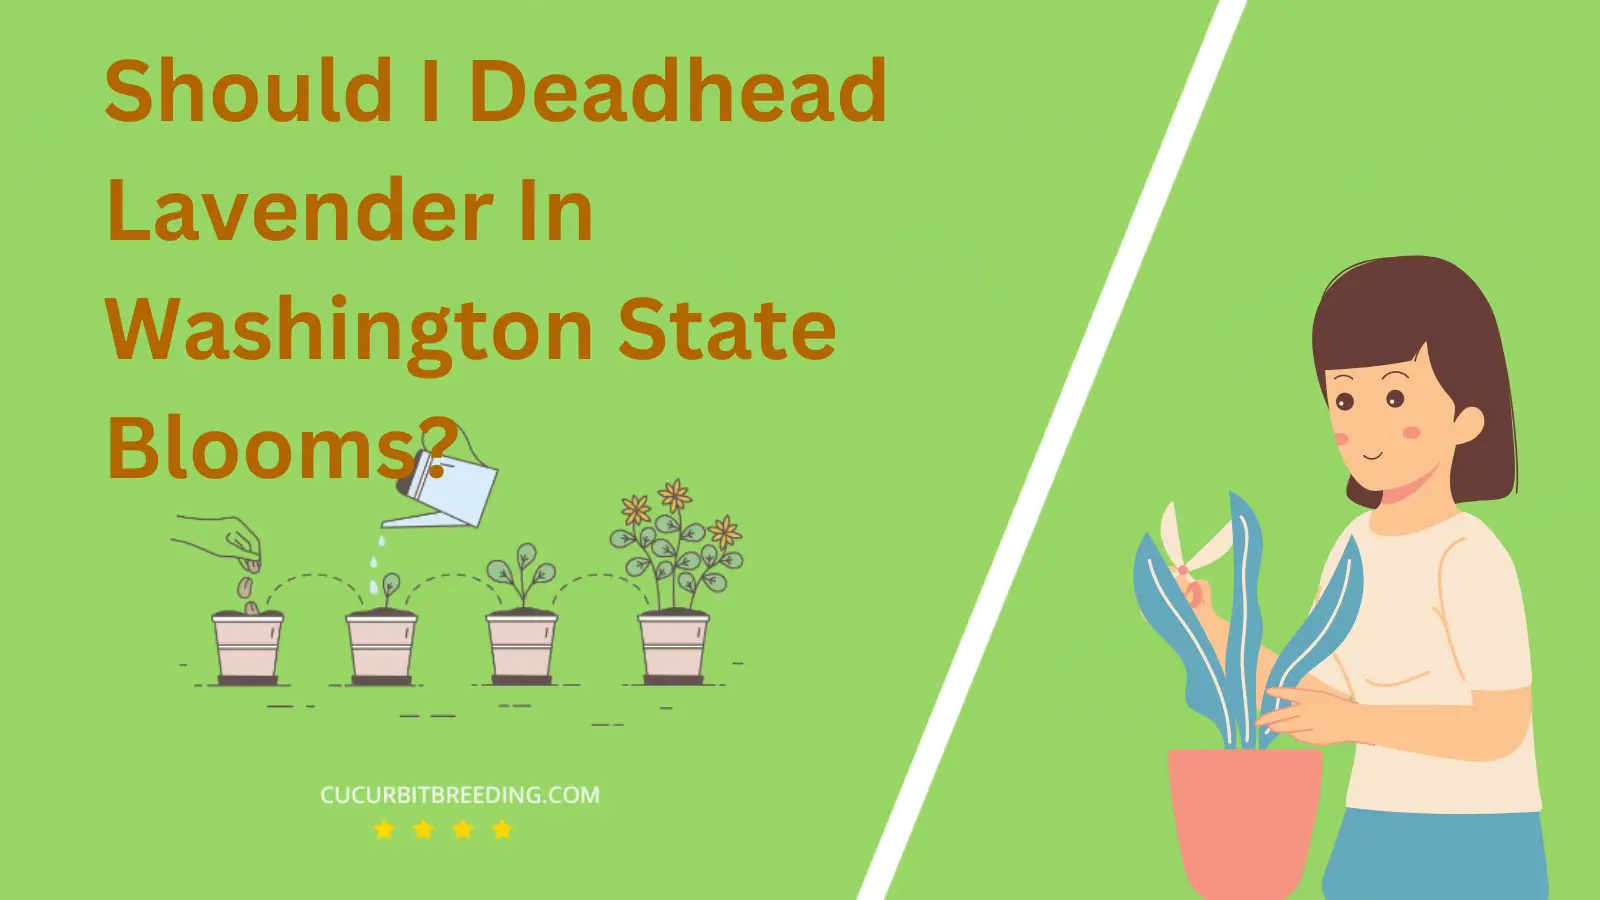 Should I Deadhead Lavender In Washington State Blooms?